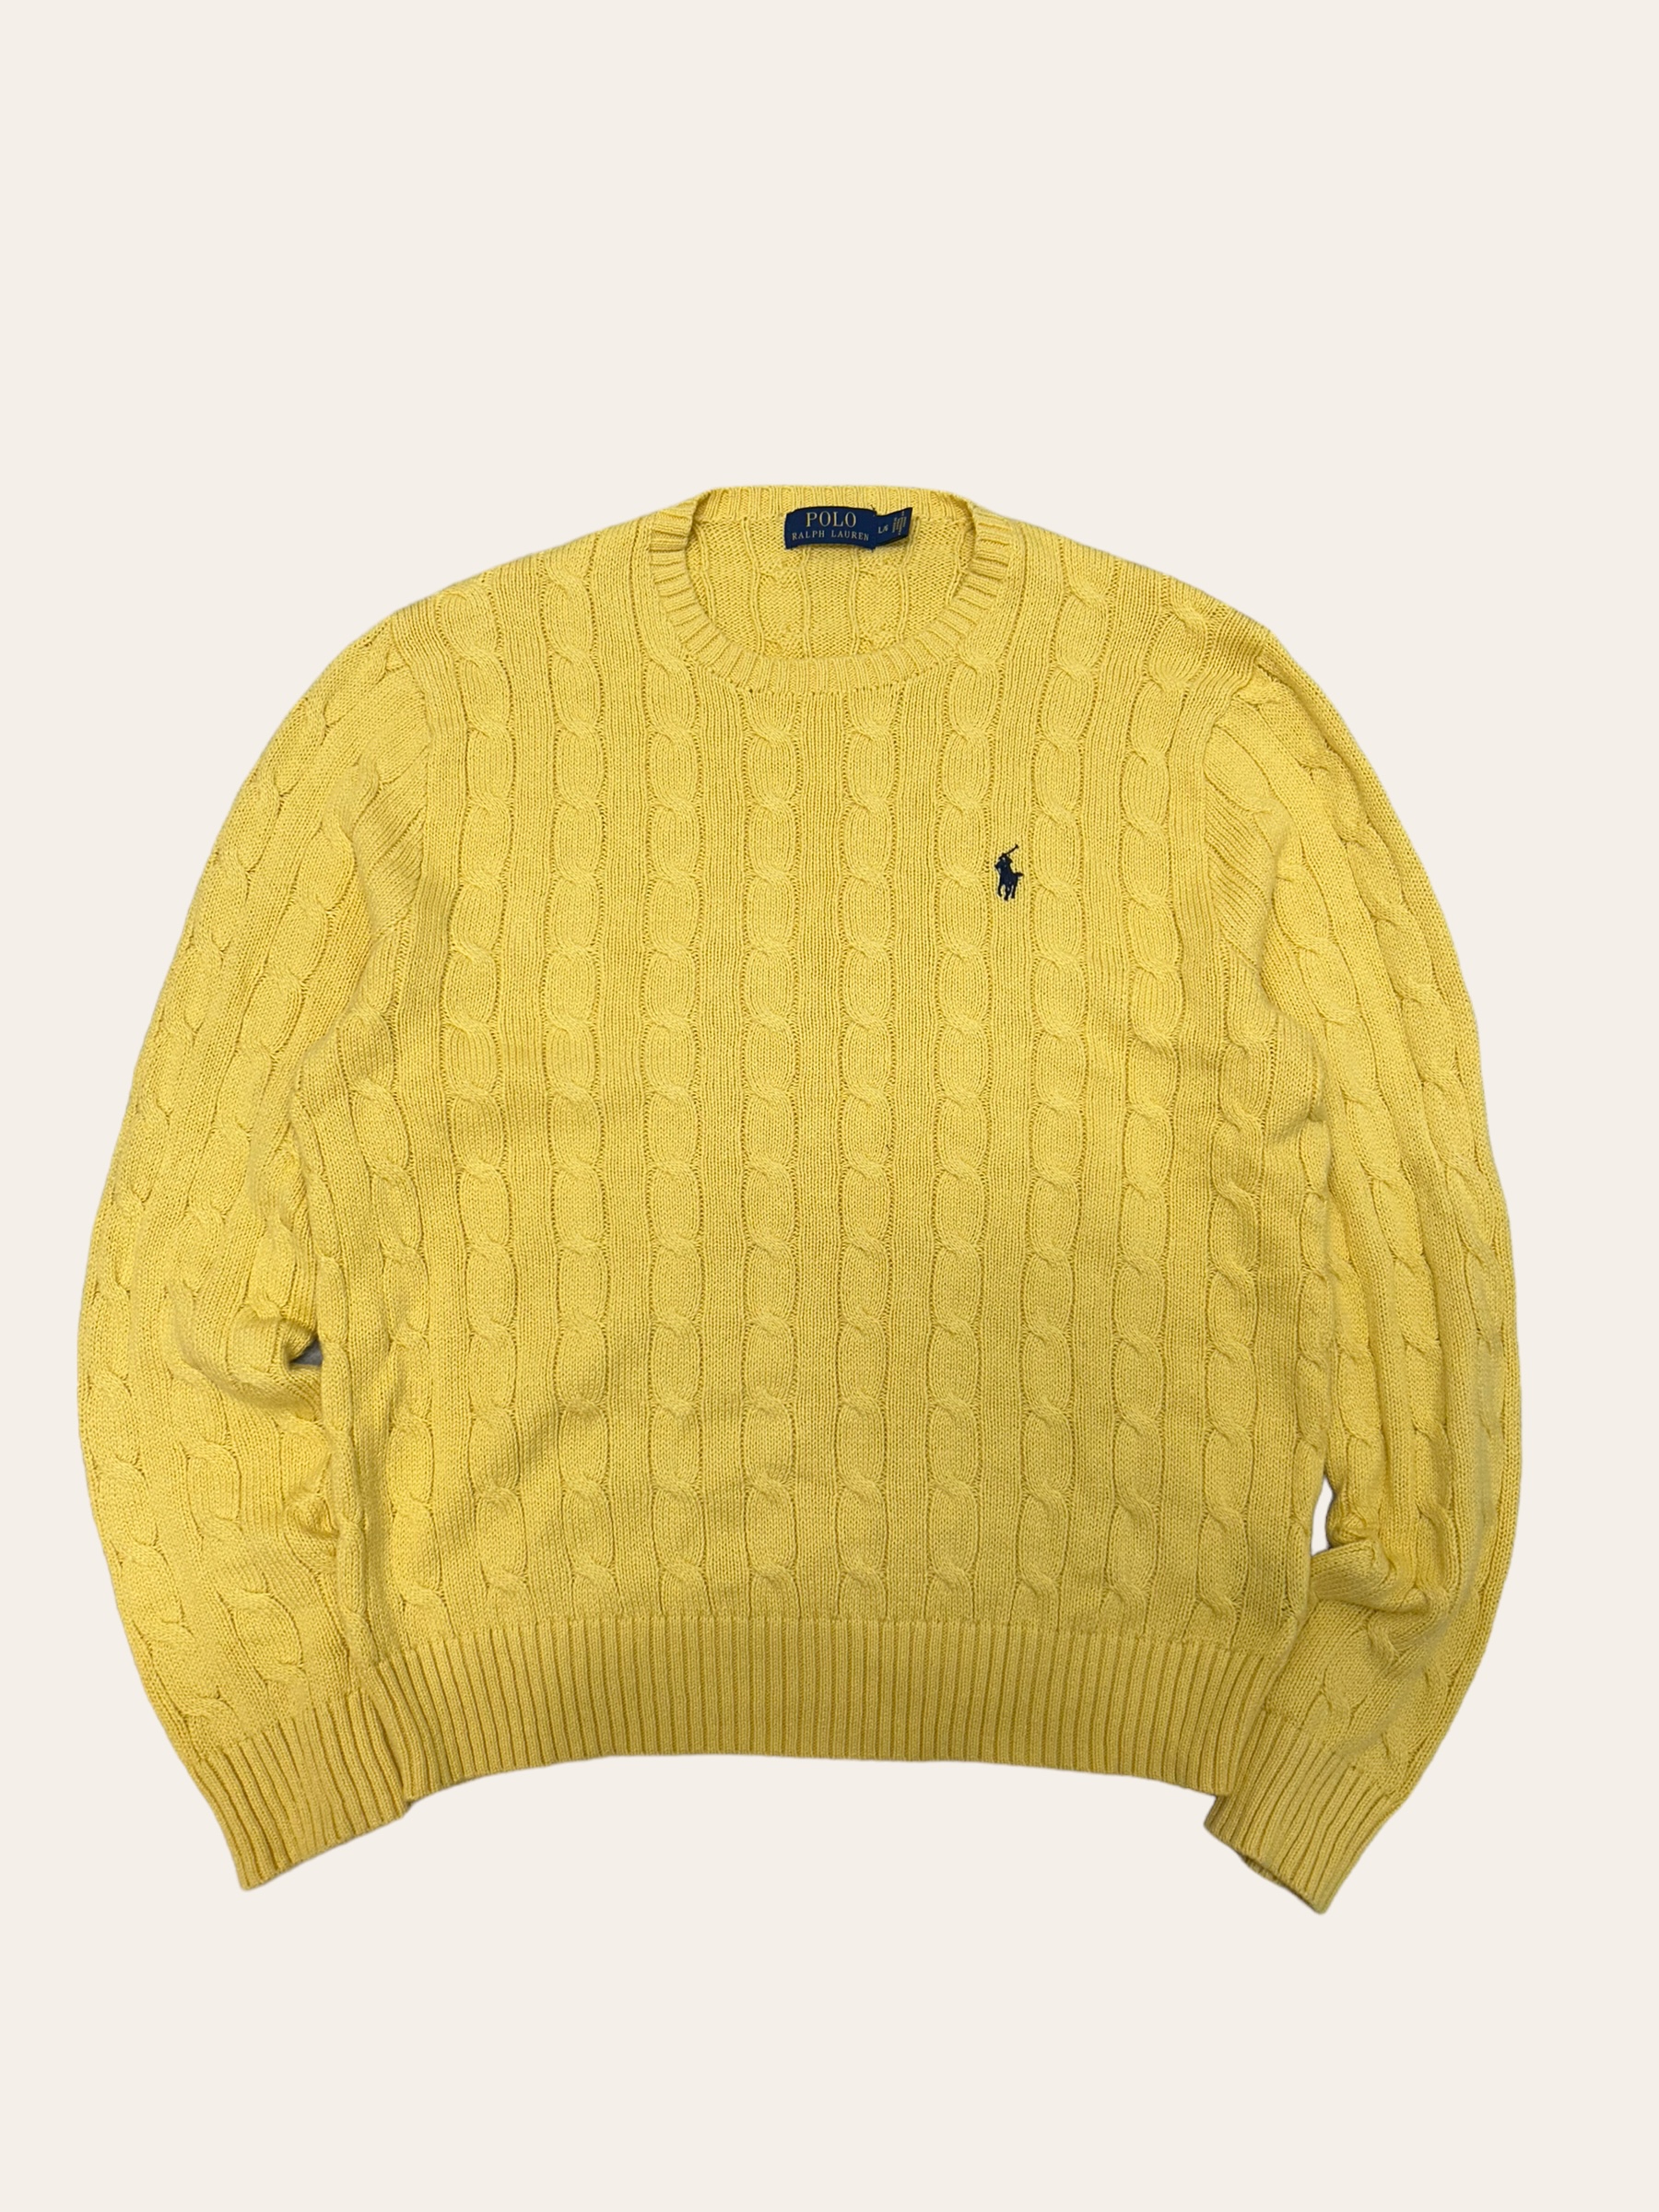 Polo ralph lauren yellow cable cotton sweater L